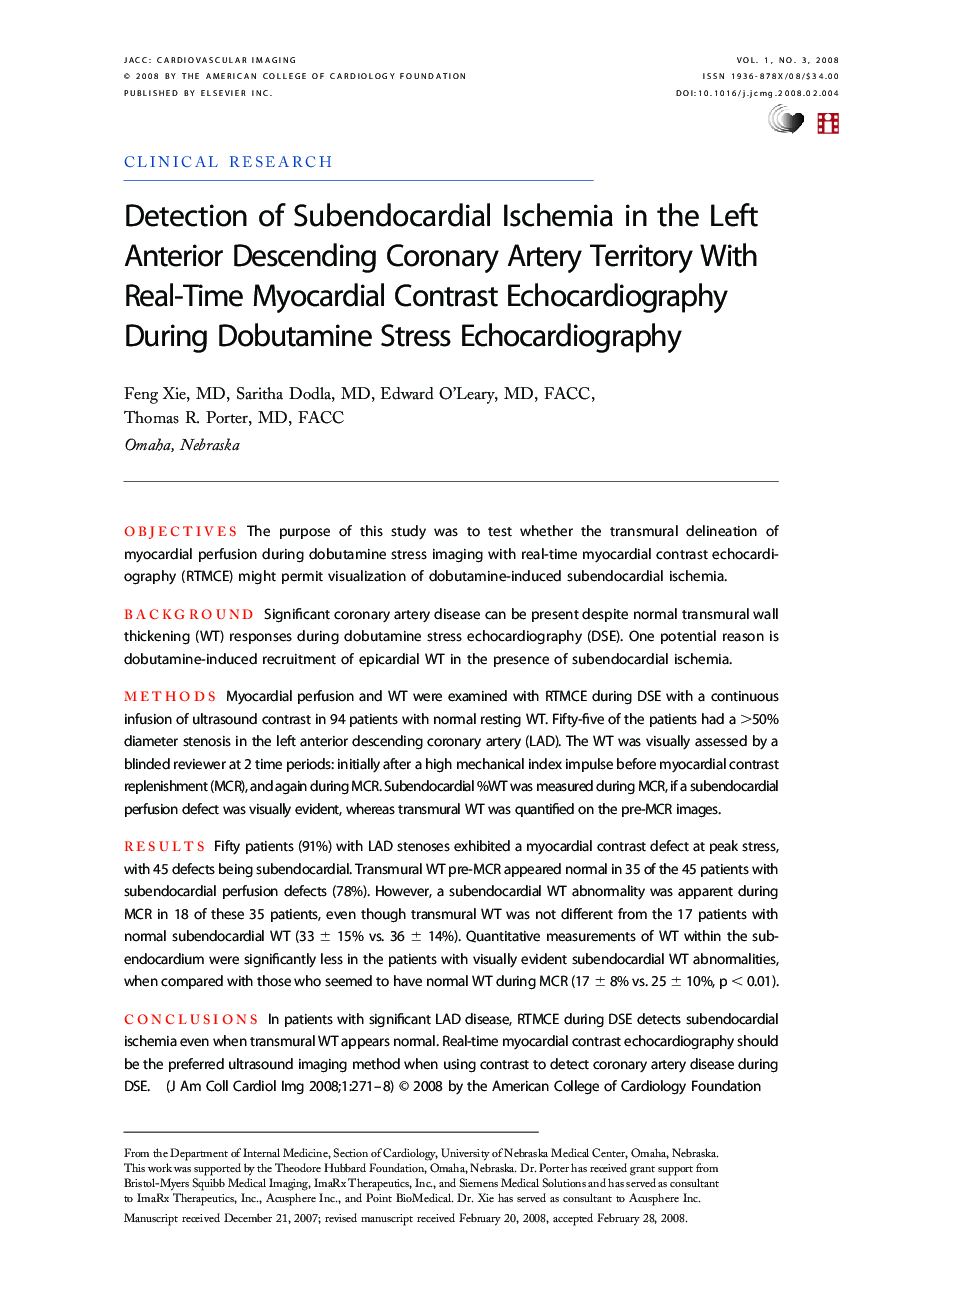 Detection of Subendocardial Ischemia in the Left Anterior Descending Coronary Artery Territory With Real-Time Myocardial Contrast Echocardiography During Dobutamine Stress Echocardiography 